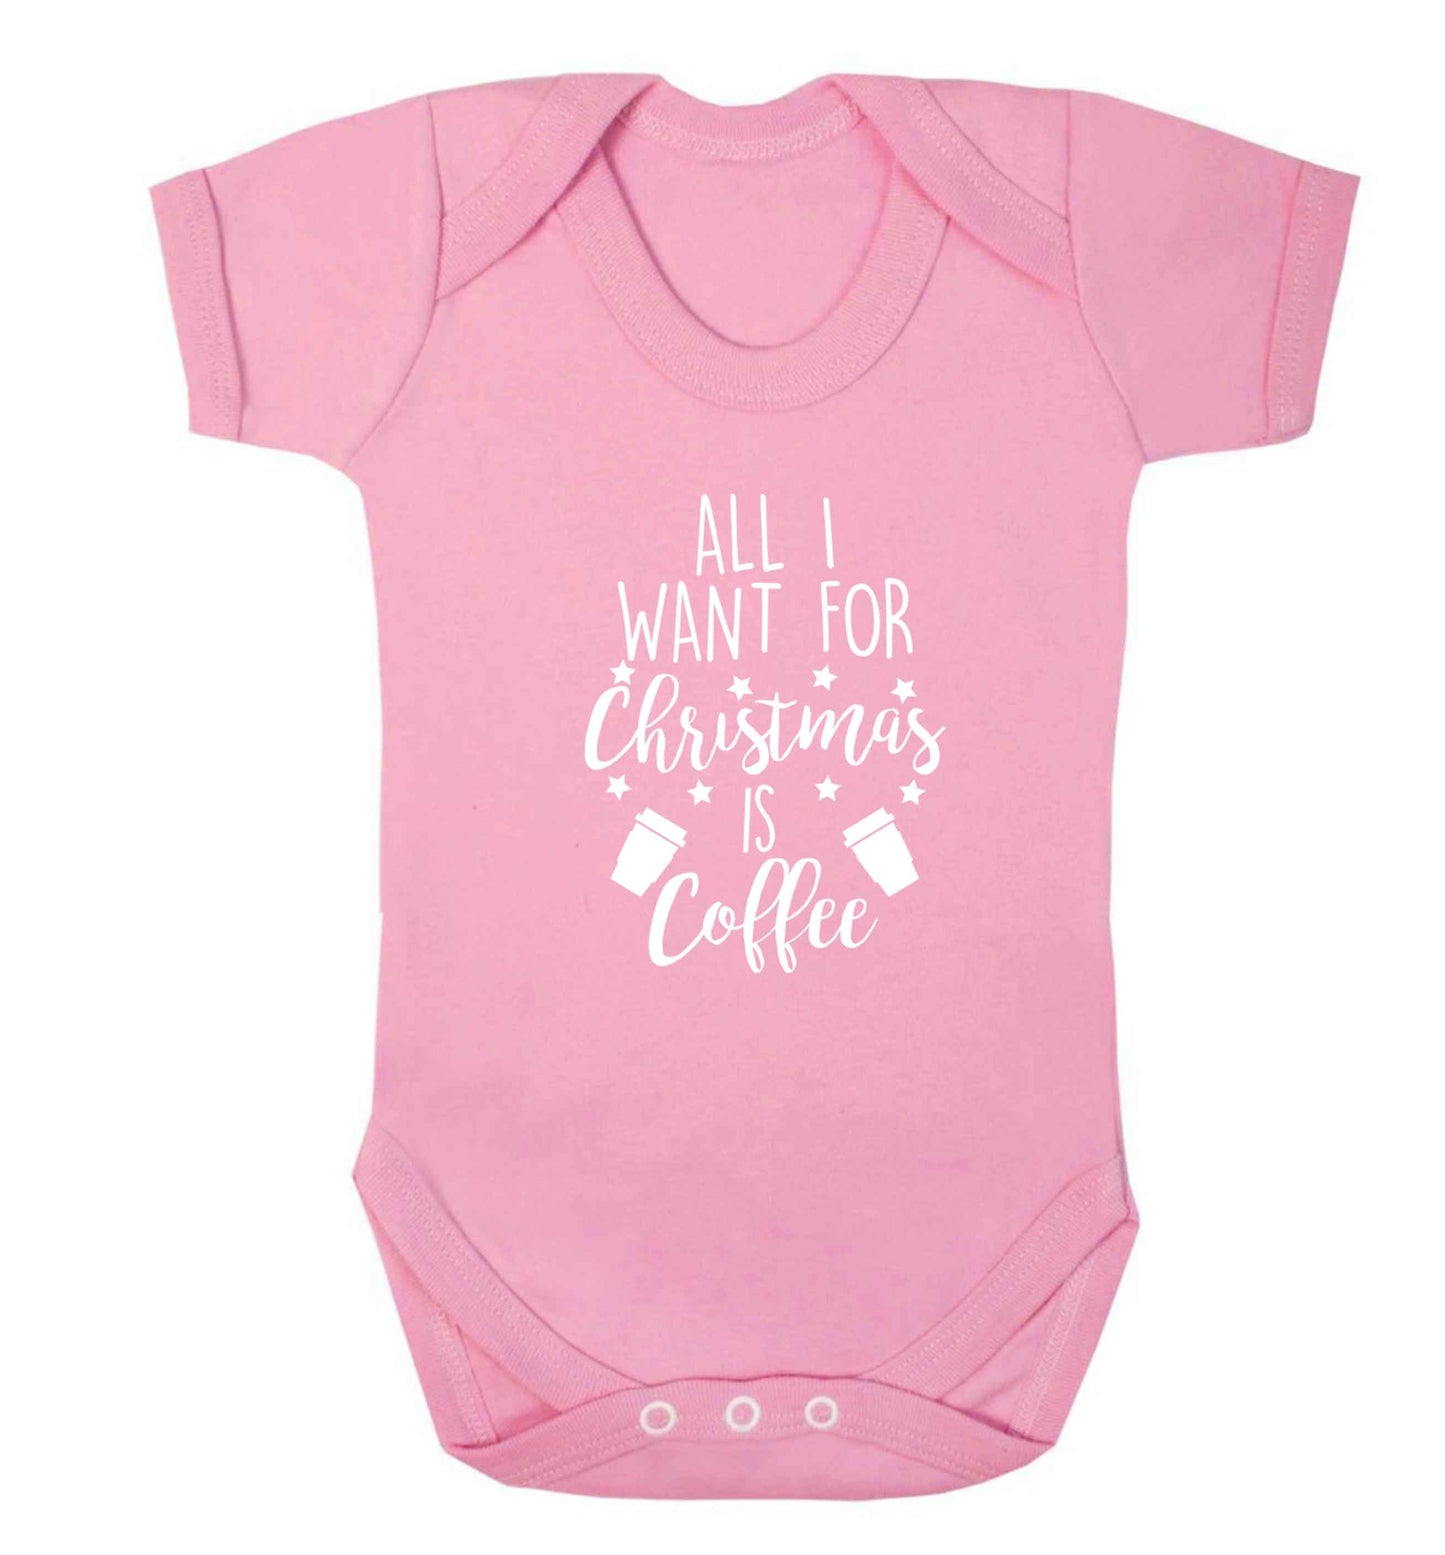 All I want for Christmas is coffee Baby Vest pale pink 18-24 months